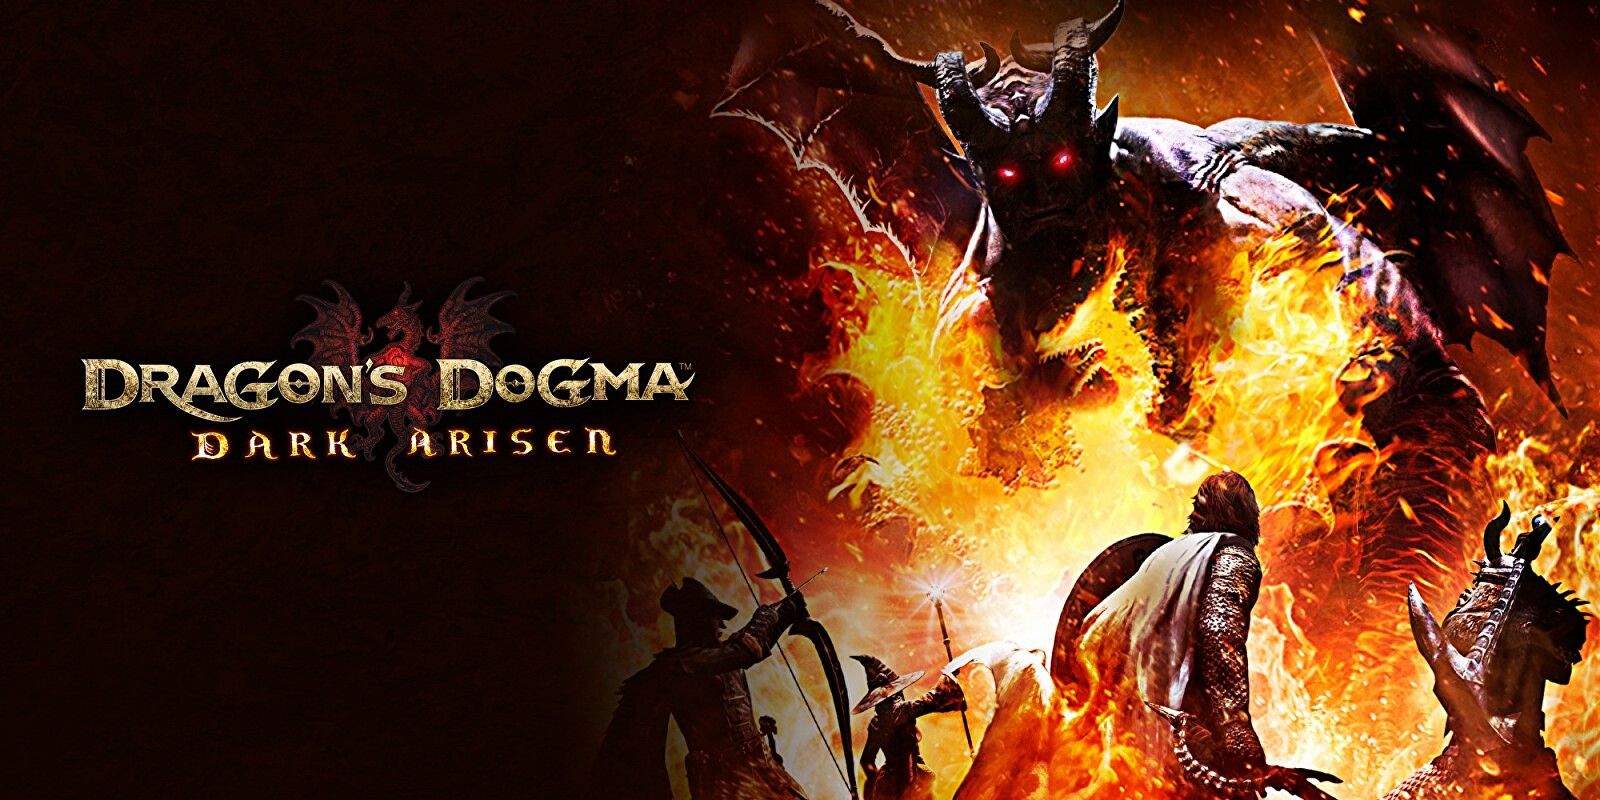 Dragon's Dogma Online First Impressions Is It Worth Playing